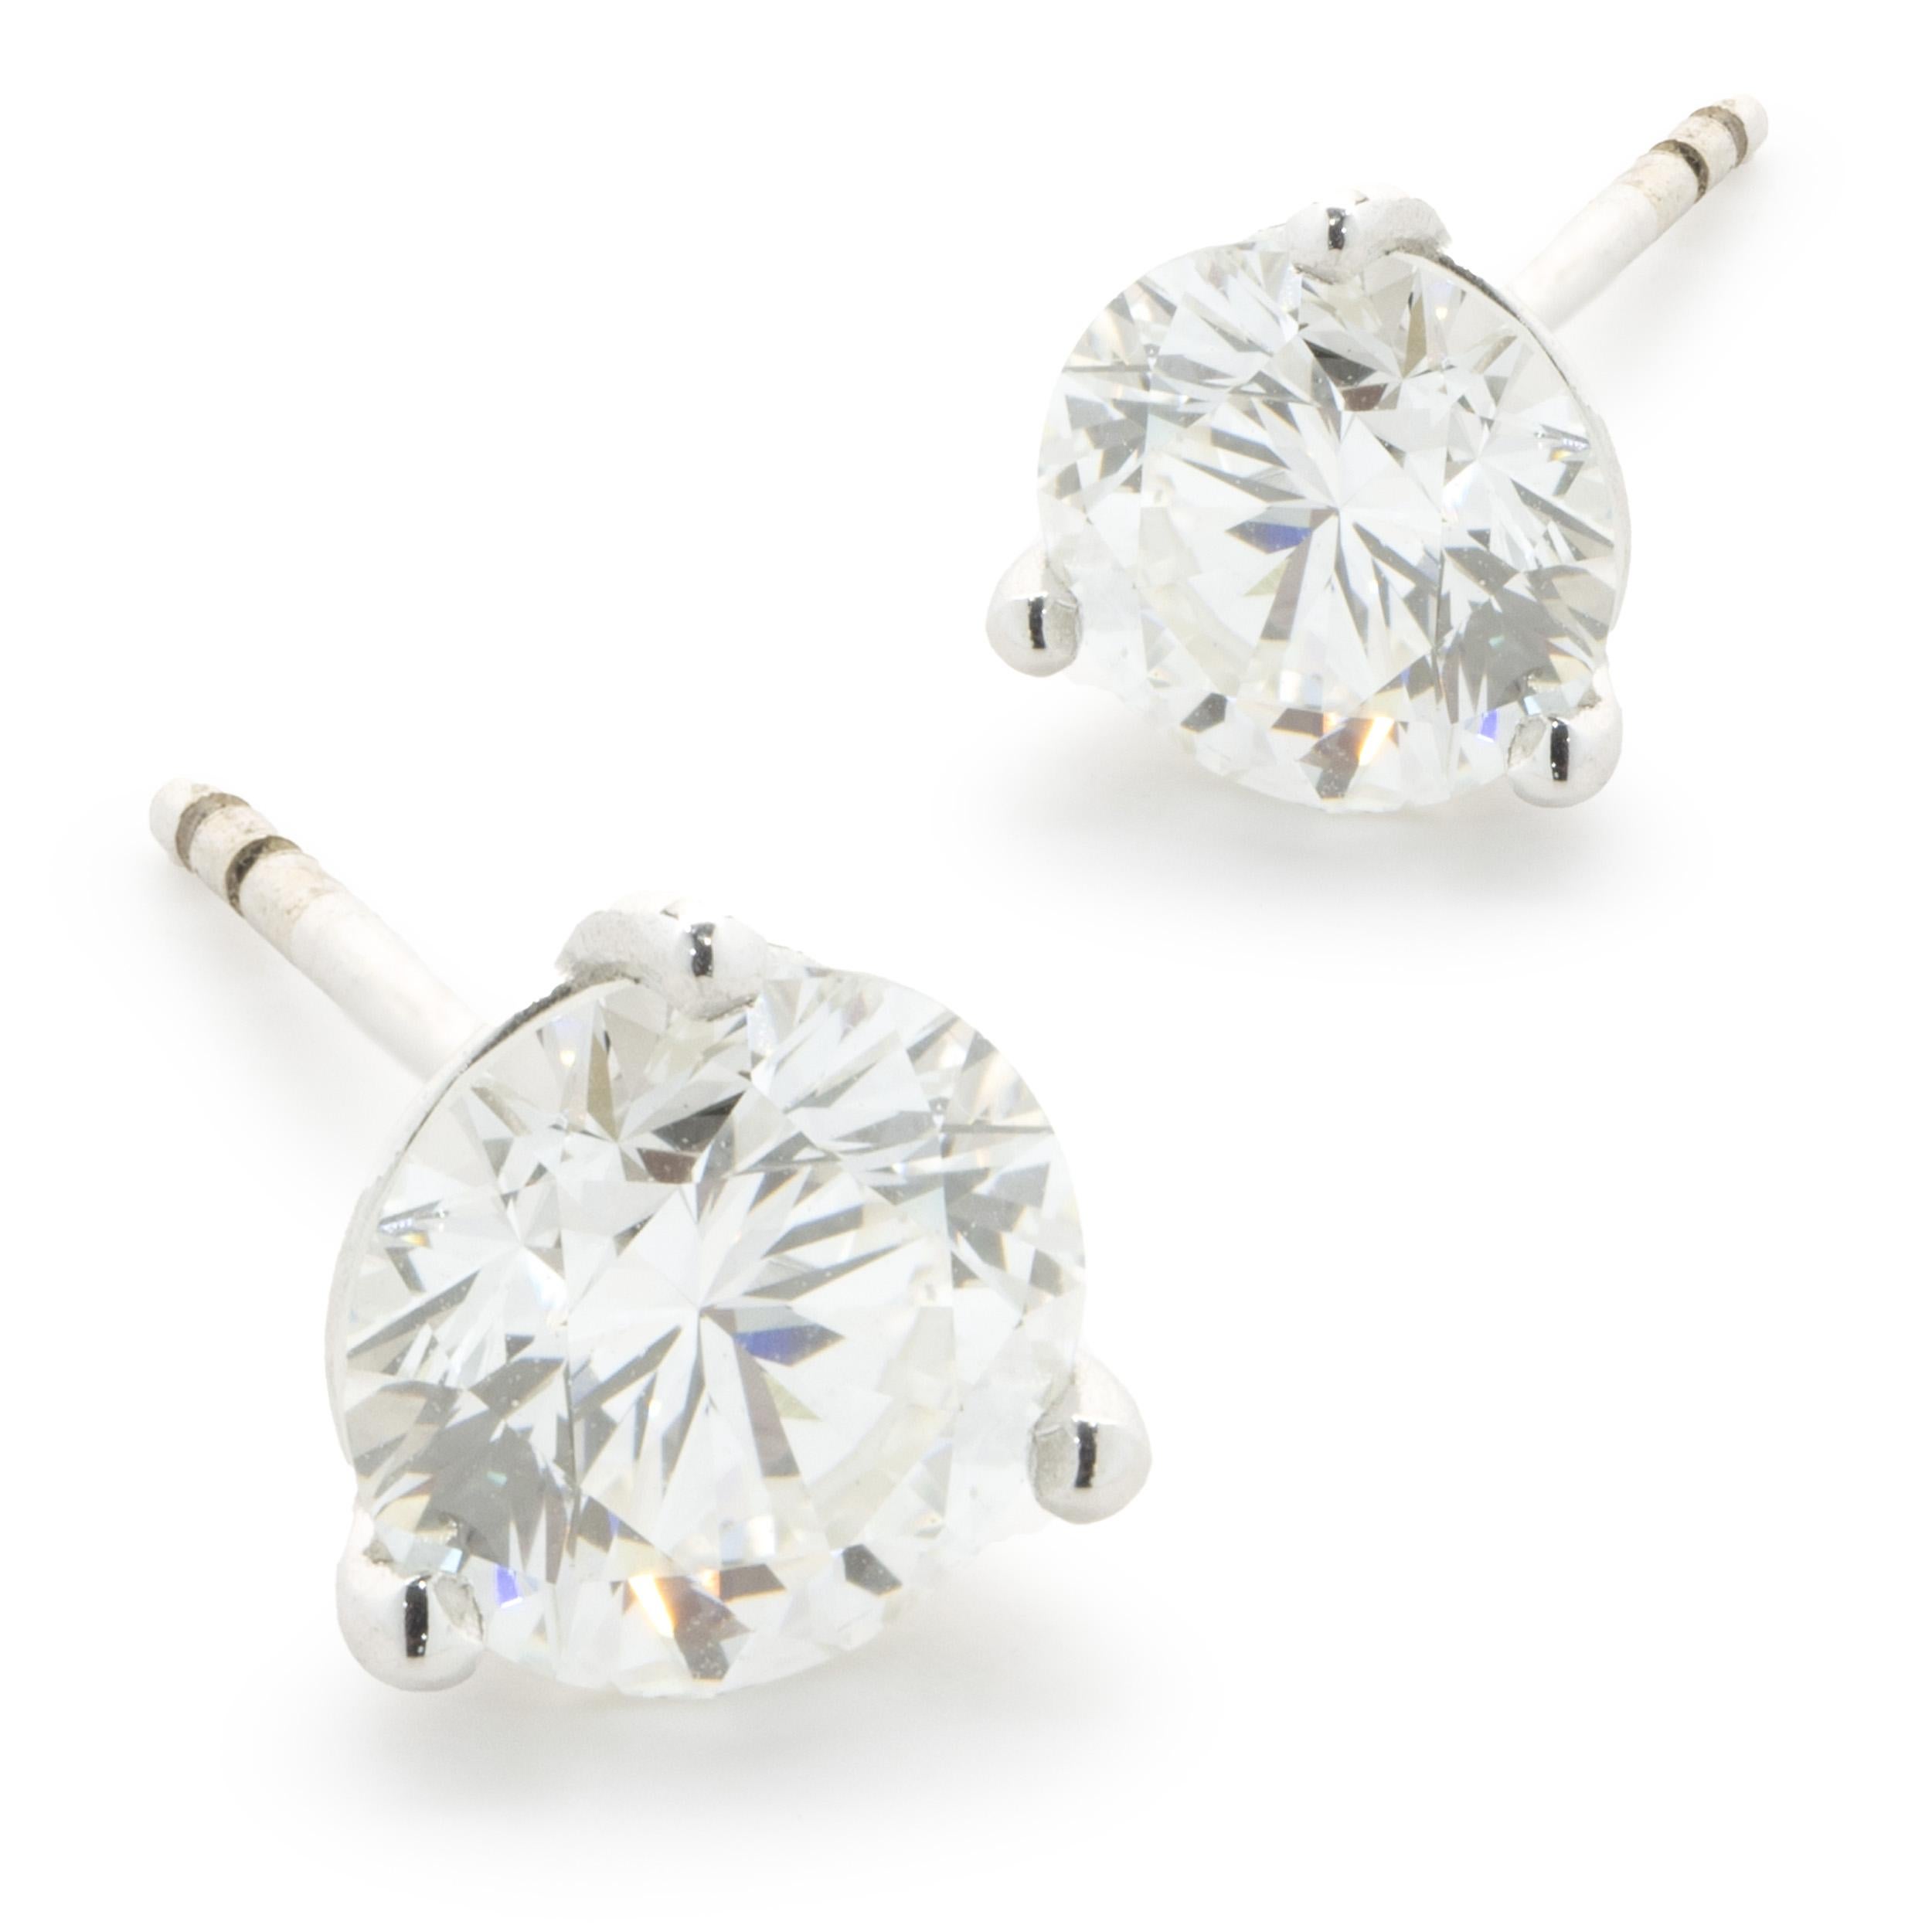 14 Karat White Gold Round Brilliant Cut Diamond Stud Earrings In Excellent Condition For Sale In Scottsdale, AZ